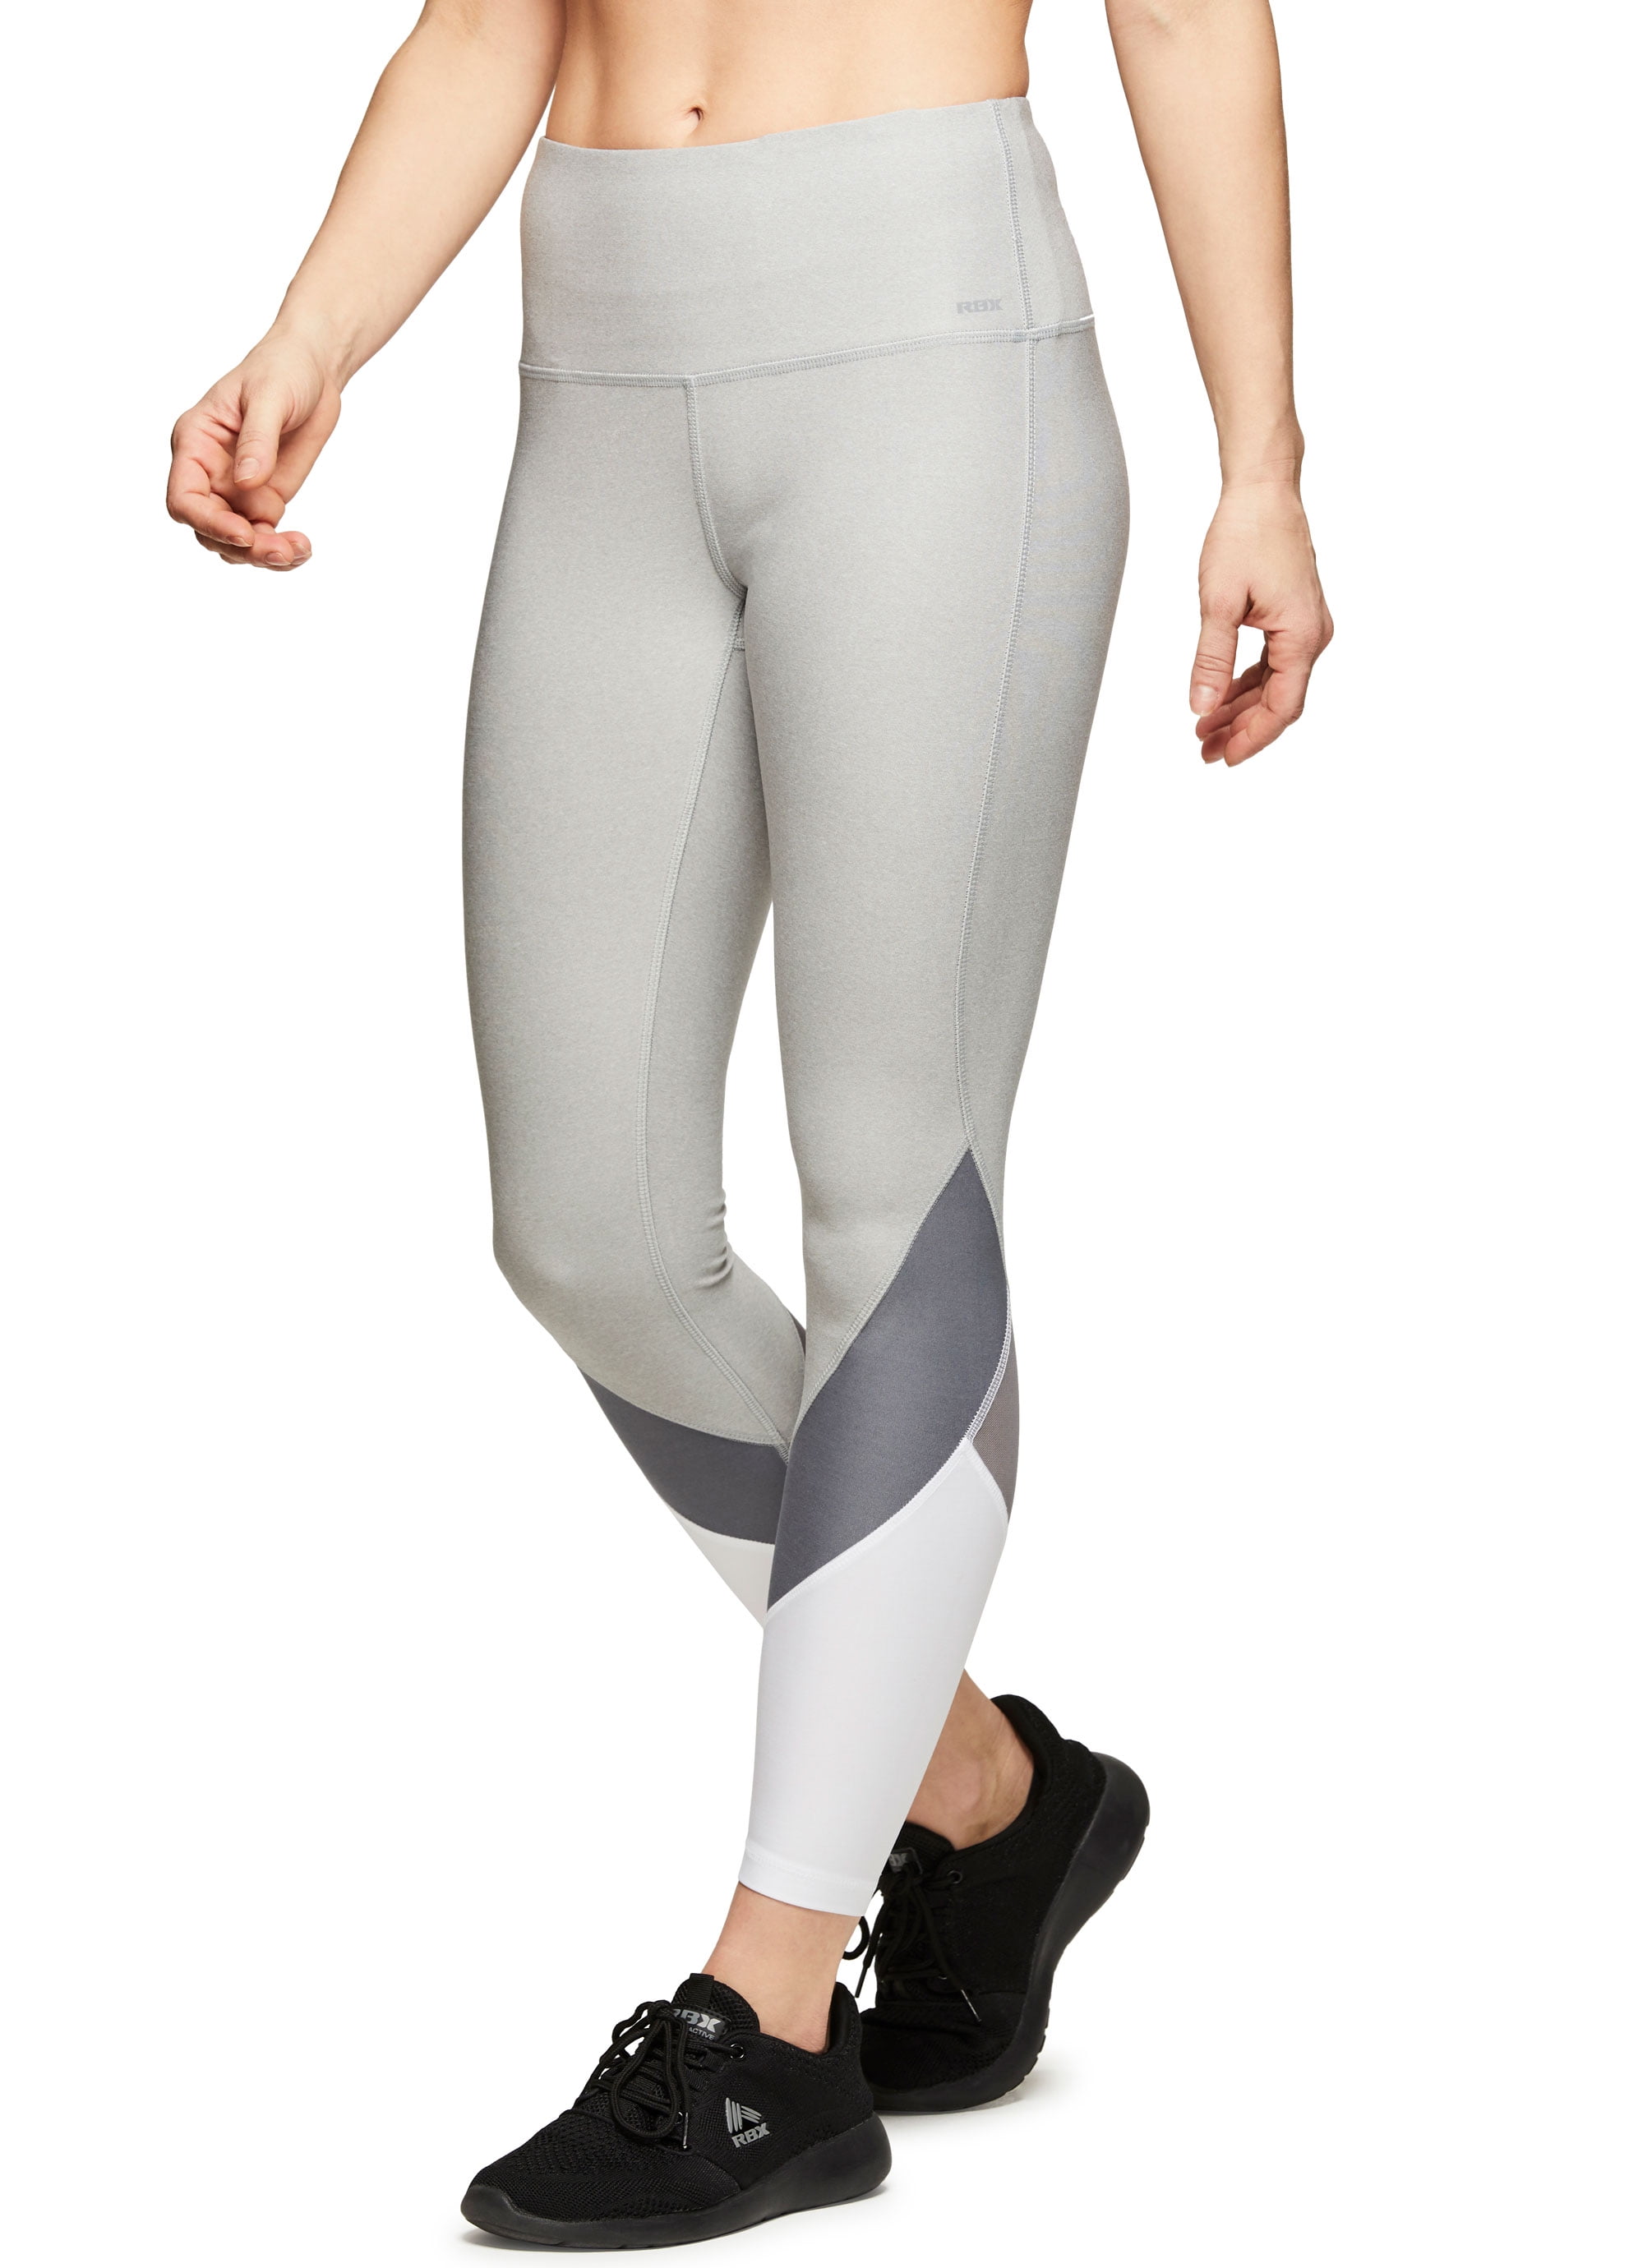 9 Sustainable Leggings to Ethically Stretch Your Legs, Not The Planet